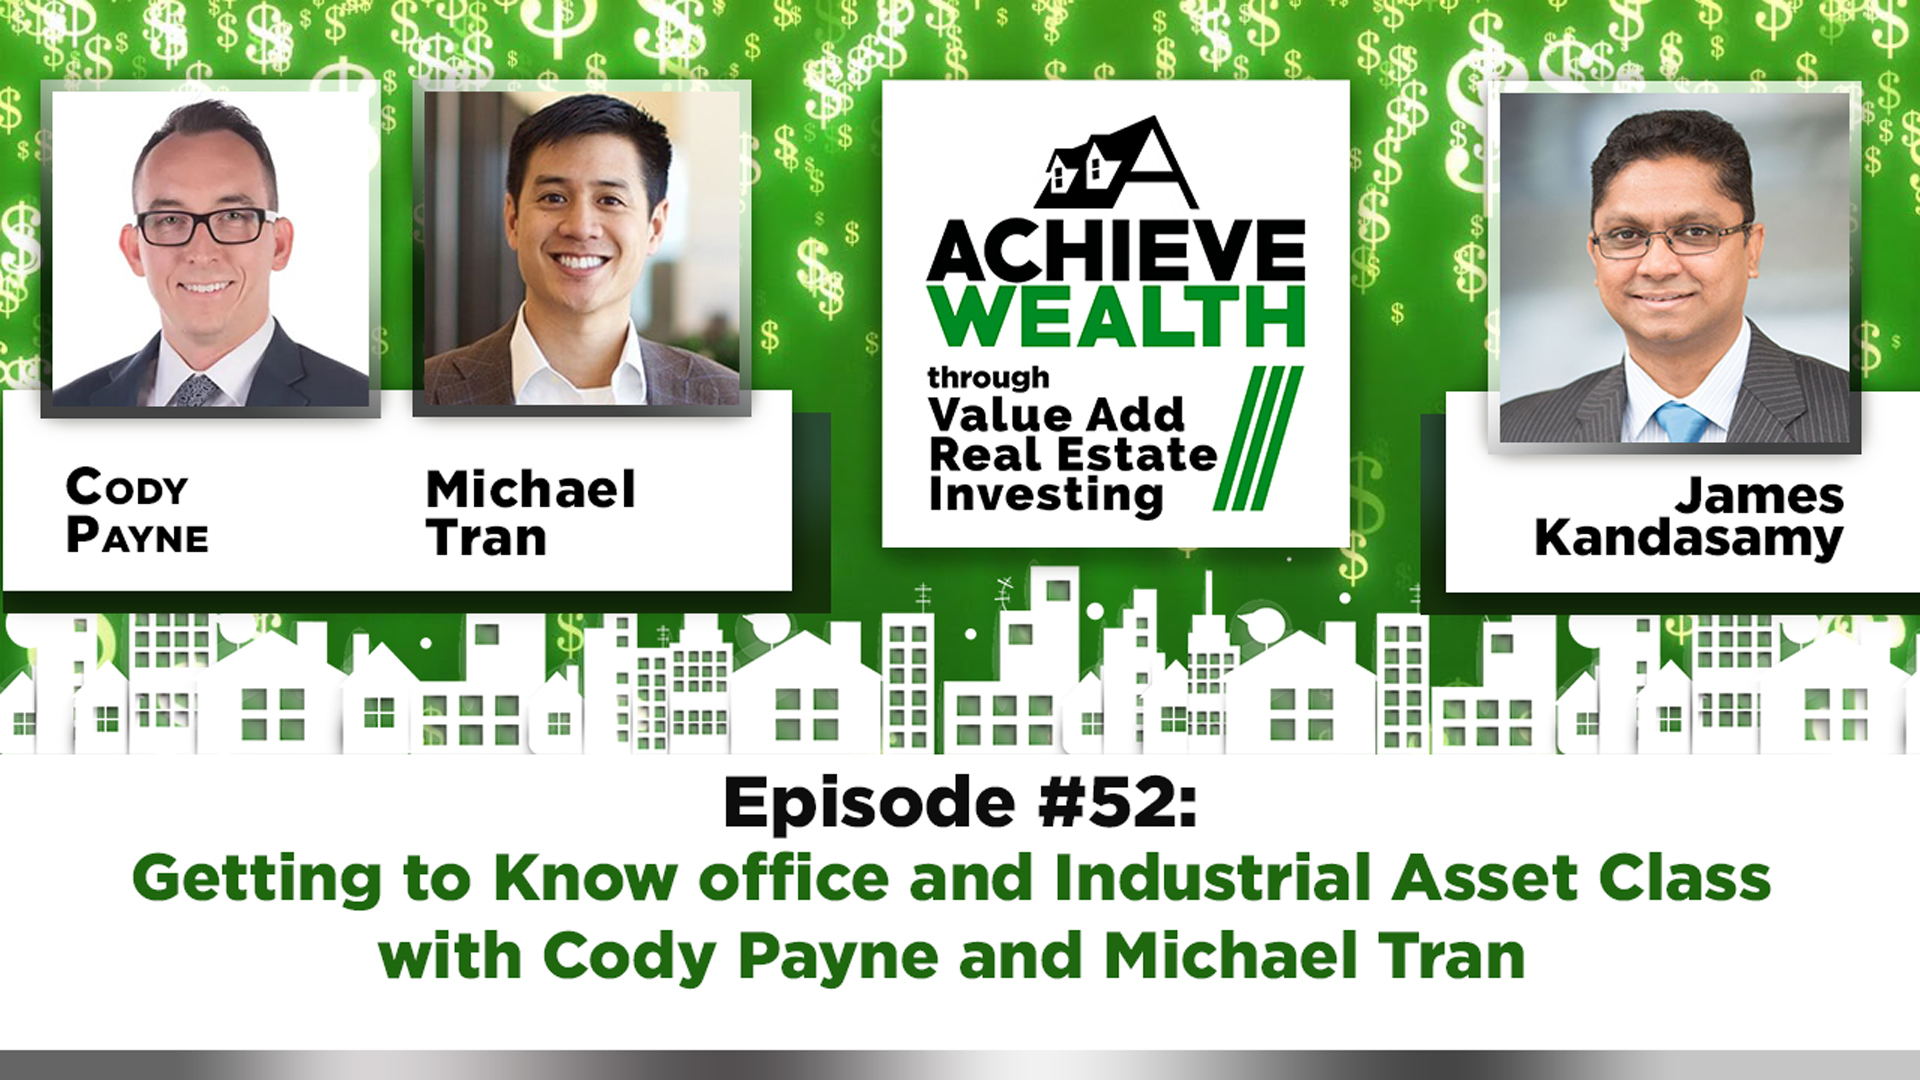 Ep#52 Getting to Know office and Industrial Asset Class with Cody Payne and Michael Tran